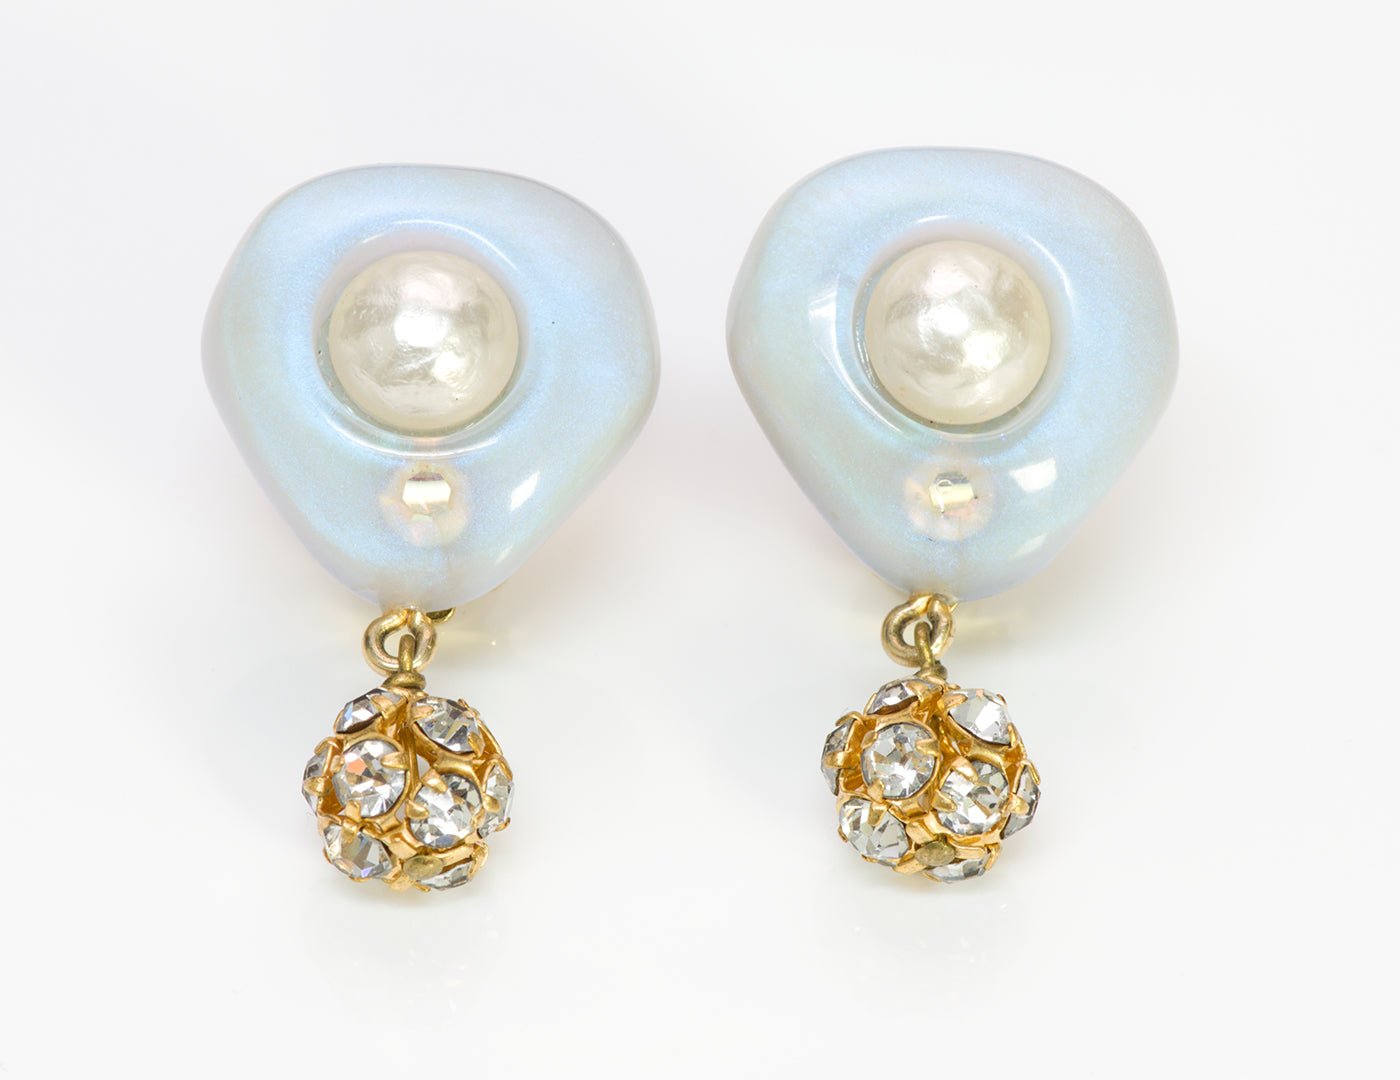 Chanel 1996 Pearl Crystal Earrings - DSF Antique Jewelry